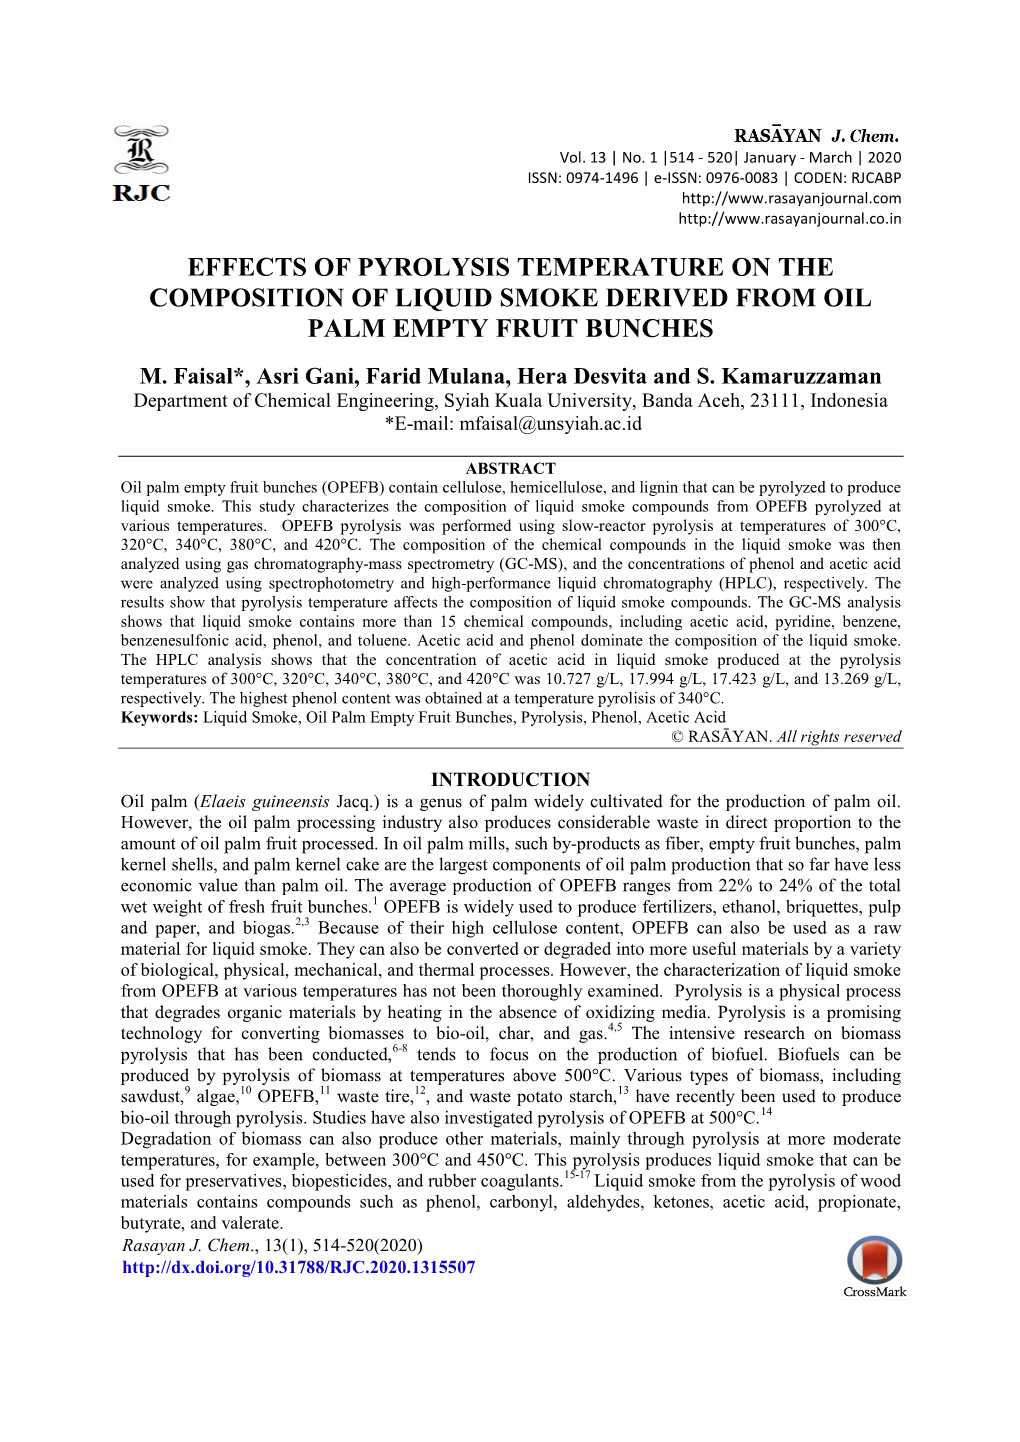 Effects of Pyrolysis Temperature on the Composition of Liquid Smoke Derived from Oil Palm Empty Fruit Bunches